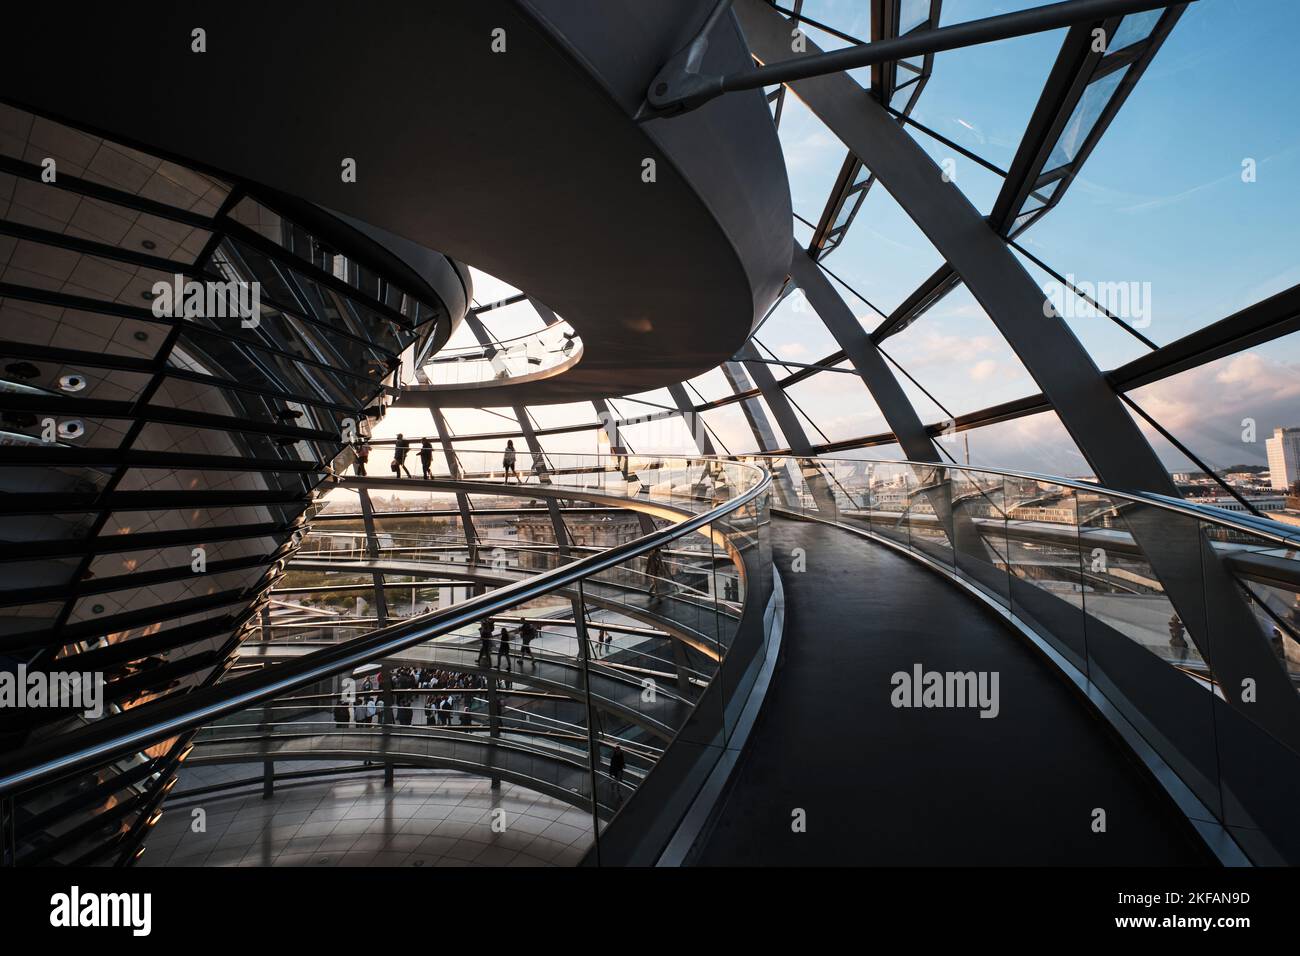 Berlin, Germany - Sept 2022: Sunset View of Reichstag dome interior. The dome designed by Norman Foster and sits on top of the Reichstag building. Stock Photo